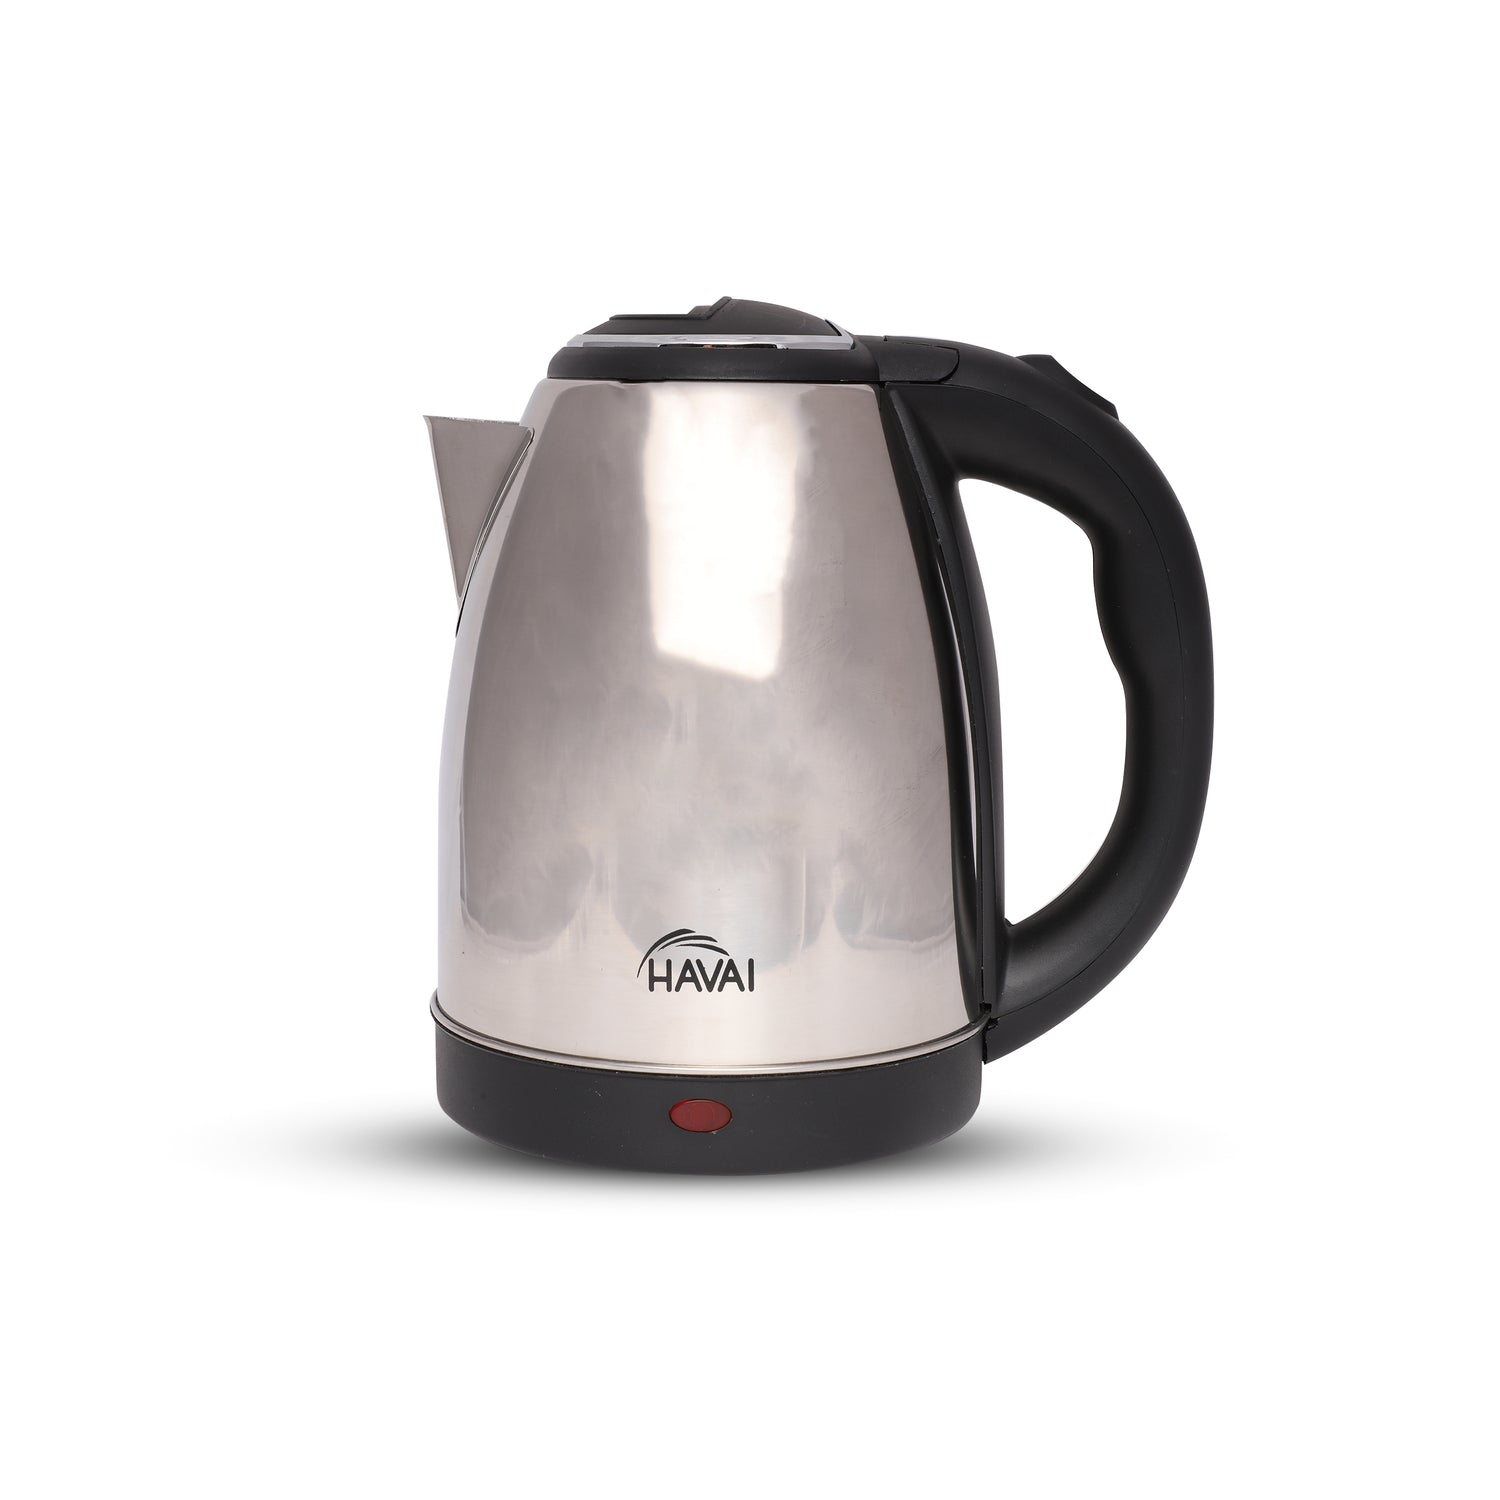 HAVAI Large Premium Electric Kettle 1.8L |Stainless Steel Inner Body | Auto Power Cut | Boil Dry Protection &amp; Cool Touch Double Wall | Portable | 1500 Watts |1 Year Warranty - AQUA BLUE